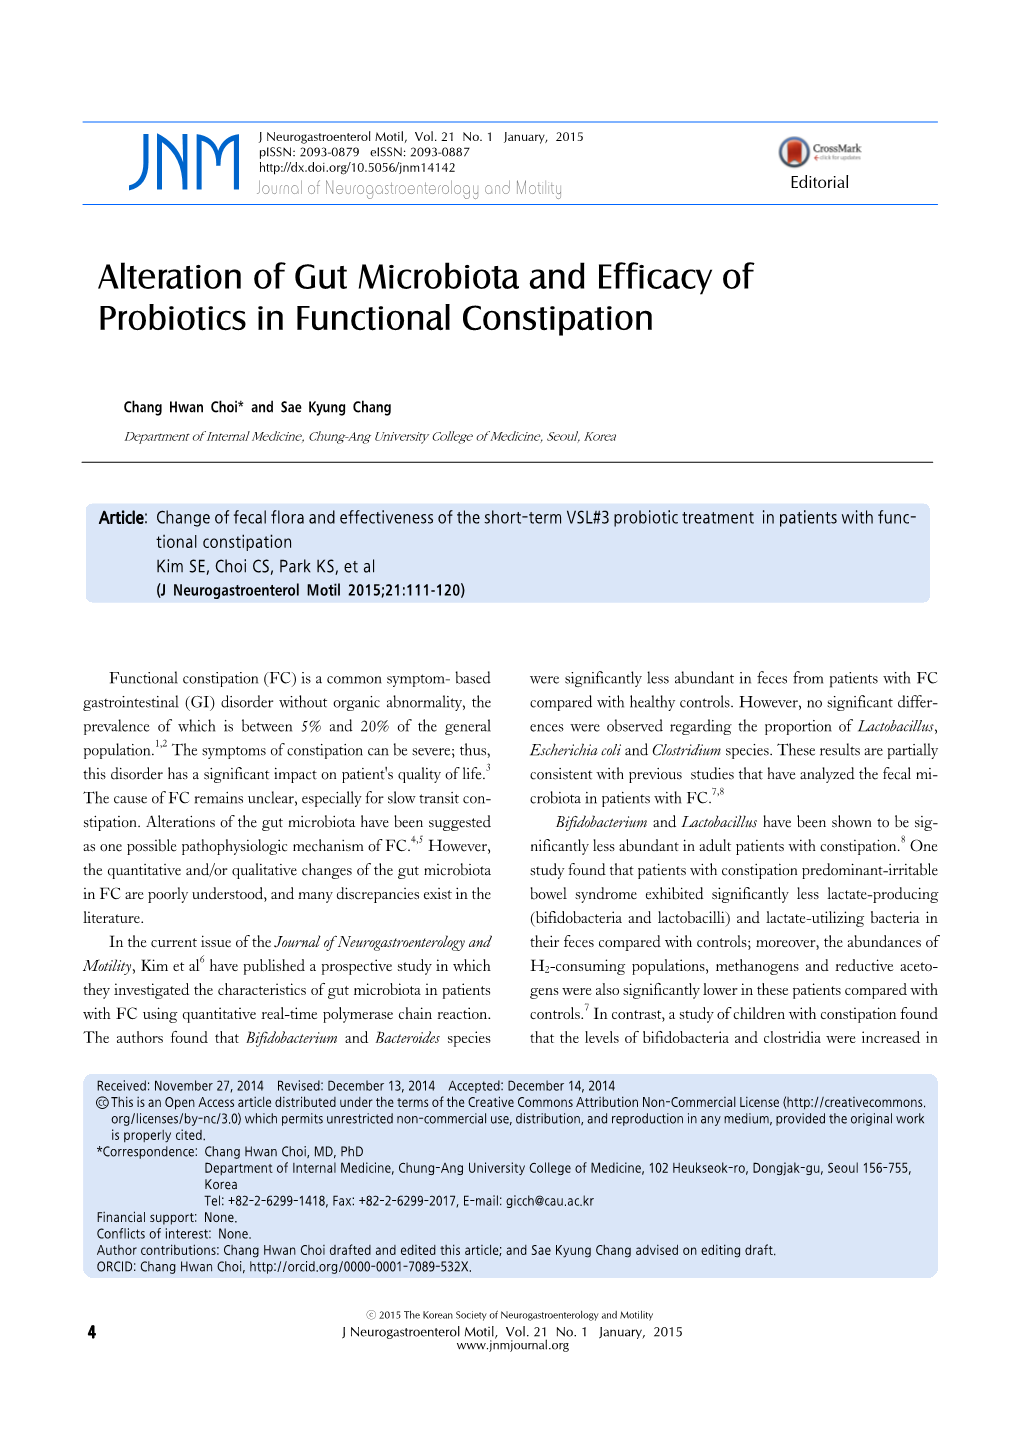 Alteration of Gut Microbiota and Efficacy of Probiotics in Functional Constipation